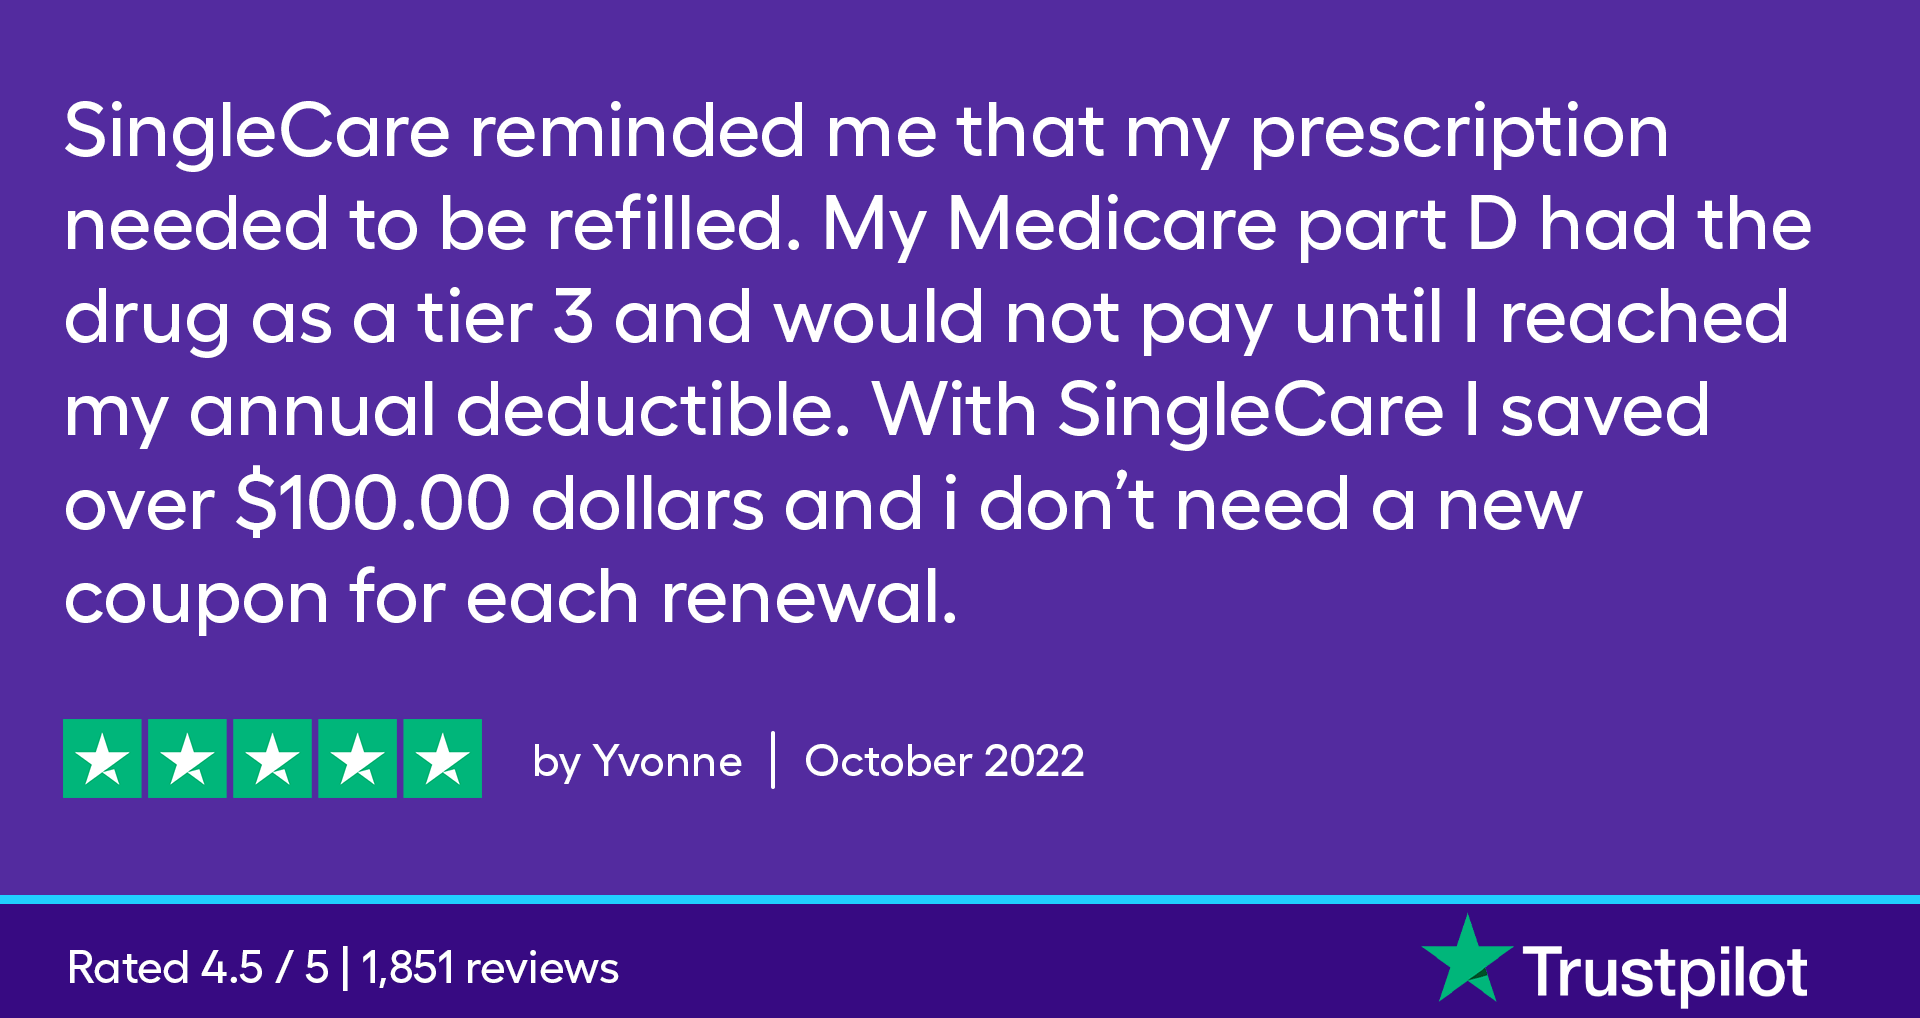 SingleCare reminded me that my prescription needed to be refilled. My Medicare part D had the drug as a tier 3 and would not pay until I reached my annual deductible. With SingleCare I saved over $100.00 dollars and I don’t need a new coupon for each renewal.